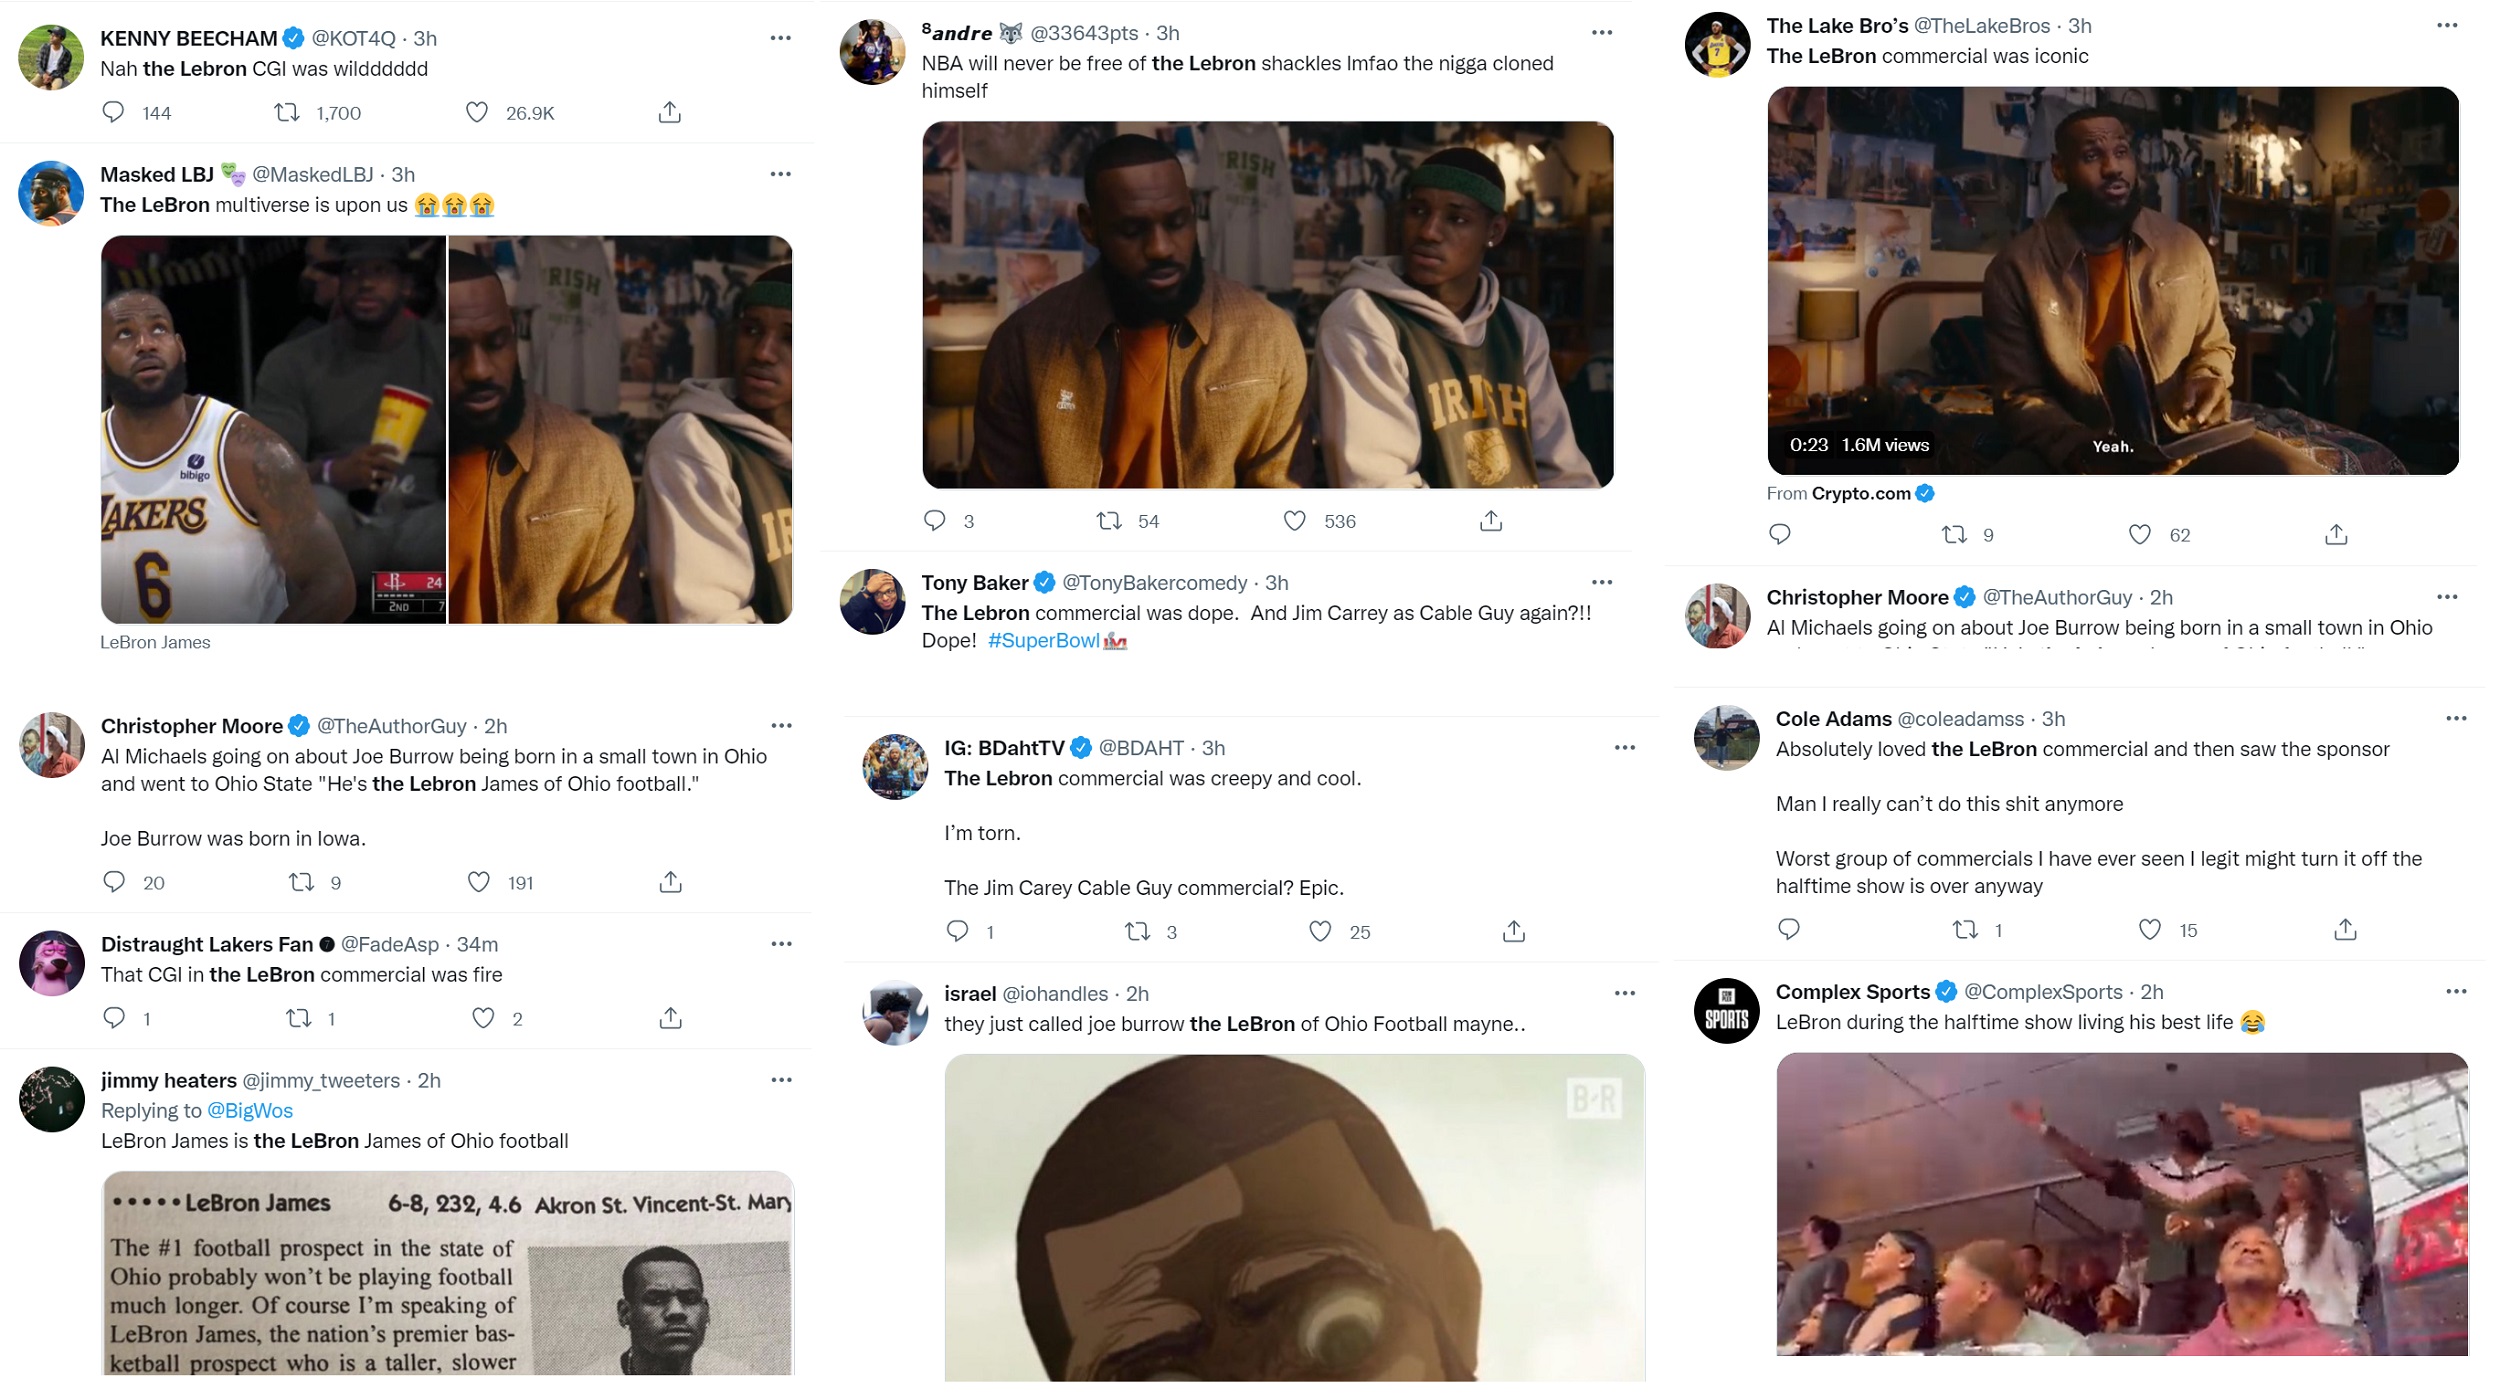 LeBron James dominates Twitter with CGI in Crypto.com commercial